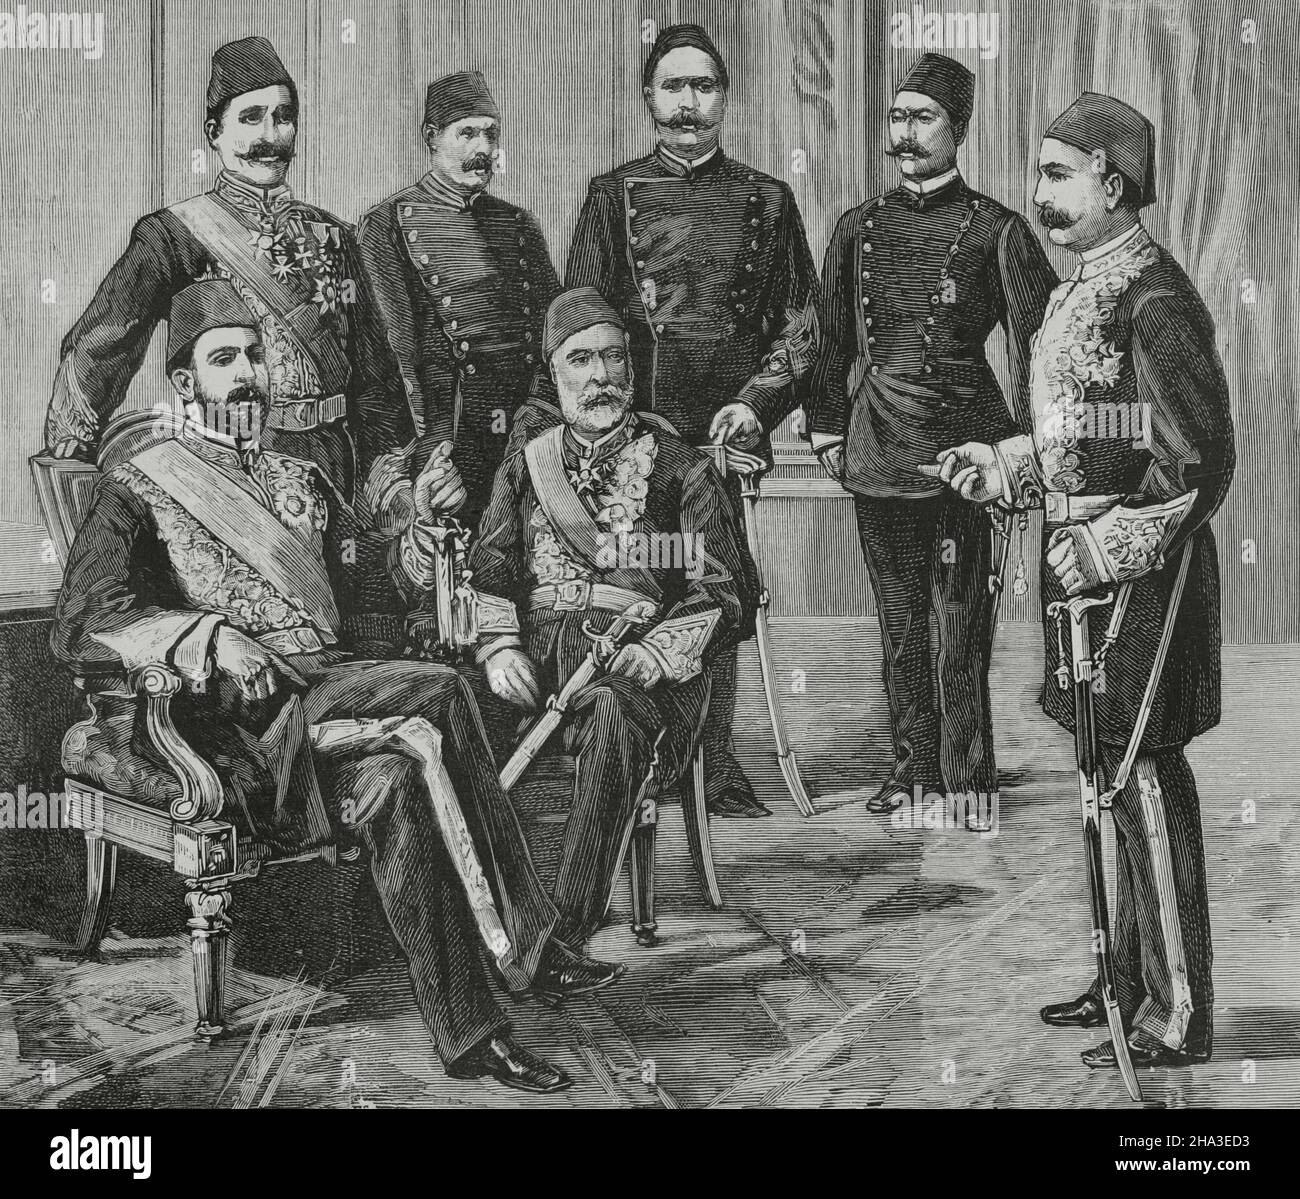 Egyptian financial and political crisis. The Khedive of Egypt, Tewfik Pasha (1852-1892) and the main leaders of the nationalist party (opposed to the intervention of foreign powers in Egyptian politics). From left to right: Tewfik Pasha (Mohammad Tewfik), Mustafa Pasha, Ali Fahmi (Bey), Mohamed Sherif Pasha, Ahmed Orabi (Bey), Abdallah Helmi Pasha and Fakhri Pasha. Engraving. La Ilustración Española y Americana, 1882. Stock Photo